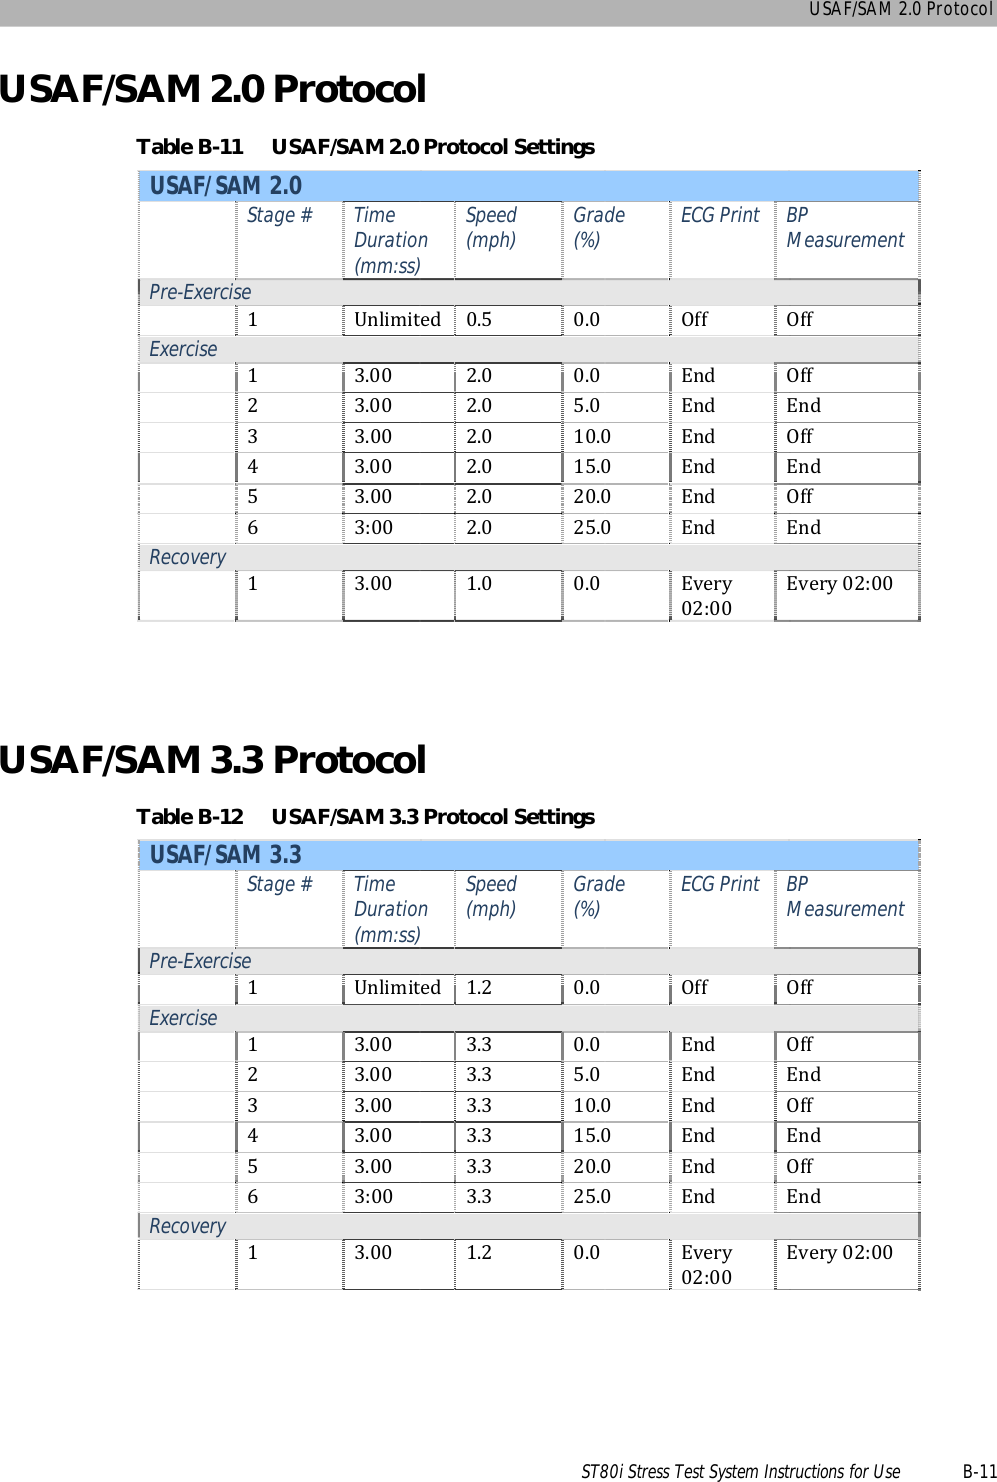 USAF/SAM 2.0 ProtocolST80i Stress Test System Instructions for Use B-11USAF/SAM 2.0 ProtocolTable B-11 USAF/SAM 2.0 Protocol SettingsUSAF/SAM 3.3 ProtocolTable B-12 USAF/SAM 3.3 Protocol SettingsUSAF/SAM 2.0  Stage #  Time Duration (mm:ss) Speed(mph)  Grade(%)  ECG Print BP Measurement Pre-Exercise  1  Unlimited  0.5  0.0  Off  Off Exercise  1  3.00  2.0  0.0  End  Off  2  3.00  2.0  5.0  End  End  3  3.00  2.0  10.0  End  Off  4  3.00  2.0  15.0  End  End  5  3.00  2.0  20.0  End  Off  6  3:00  2.0  25.0  End  End Recovery  1  3.00  1.0  0.0  Every 02:00 Every 02:00  USAF/SAM 3.3  Stage #  Time Duration (mm:ss) Speed(mph)  Grade(%)  ECG Print BP Measurement Pre-Exercise  1  Unlimited 1.2 0.0 OffOff Exercise  1  3.00  3.3  0.0  End  Off  2  3.00  3.3 5.0 End End  3  3.00  3.3  10.0  End  Off  4  3.00  3.3  15.0  End  End  5  3.00  3.3  20.0  End  Off  6  3:00  3.3  25.0  End  End Recovery  1  3.00  1.2  0.0  Every 02:00 Every 02:00  